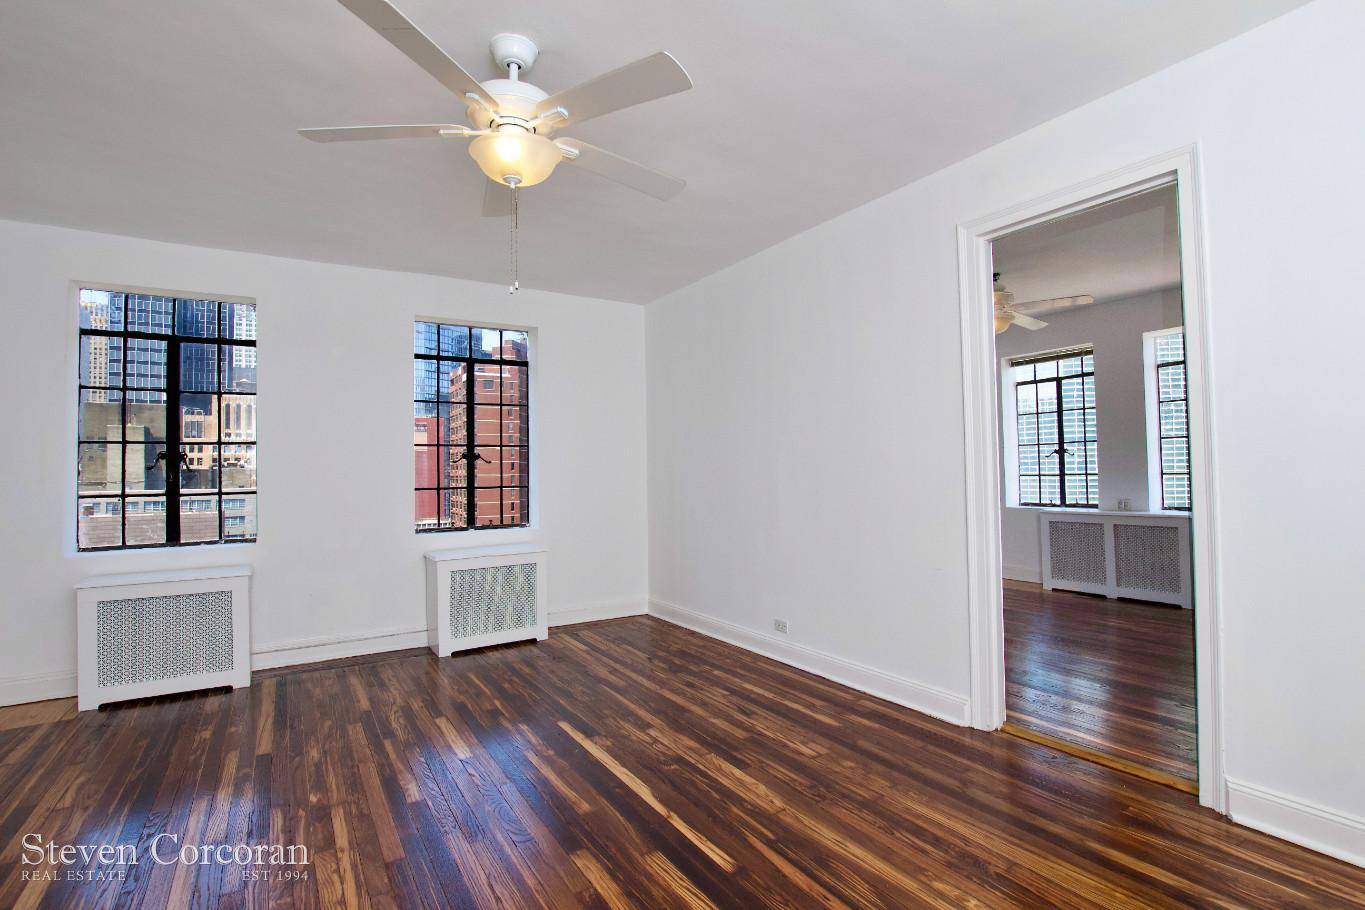 High Floor One bedroom corner in Prospect Tower Tudor City, western and northeastern exposuresThe views include the Queensborough Bridge and East River, Chrylser Building and NYC skylineBRAND NEW kitchen with ...